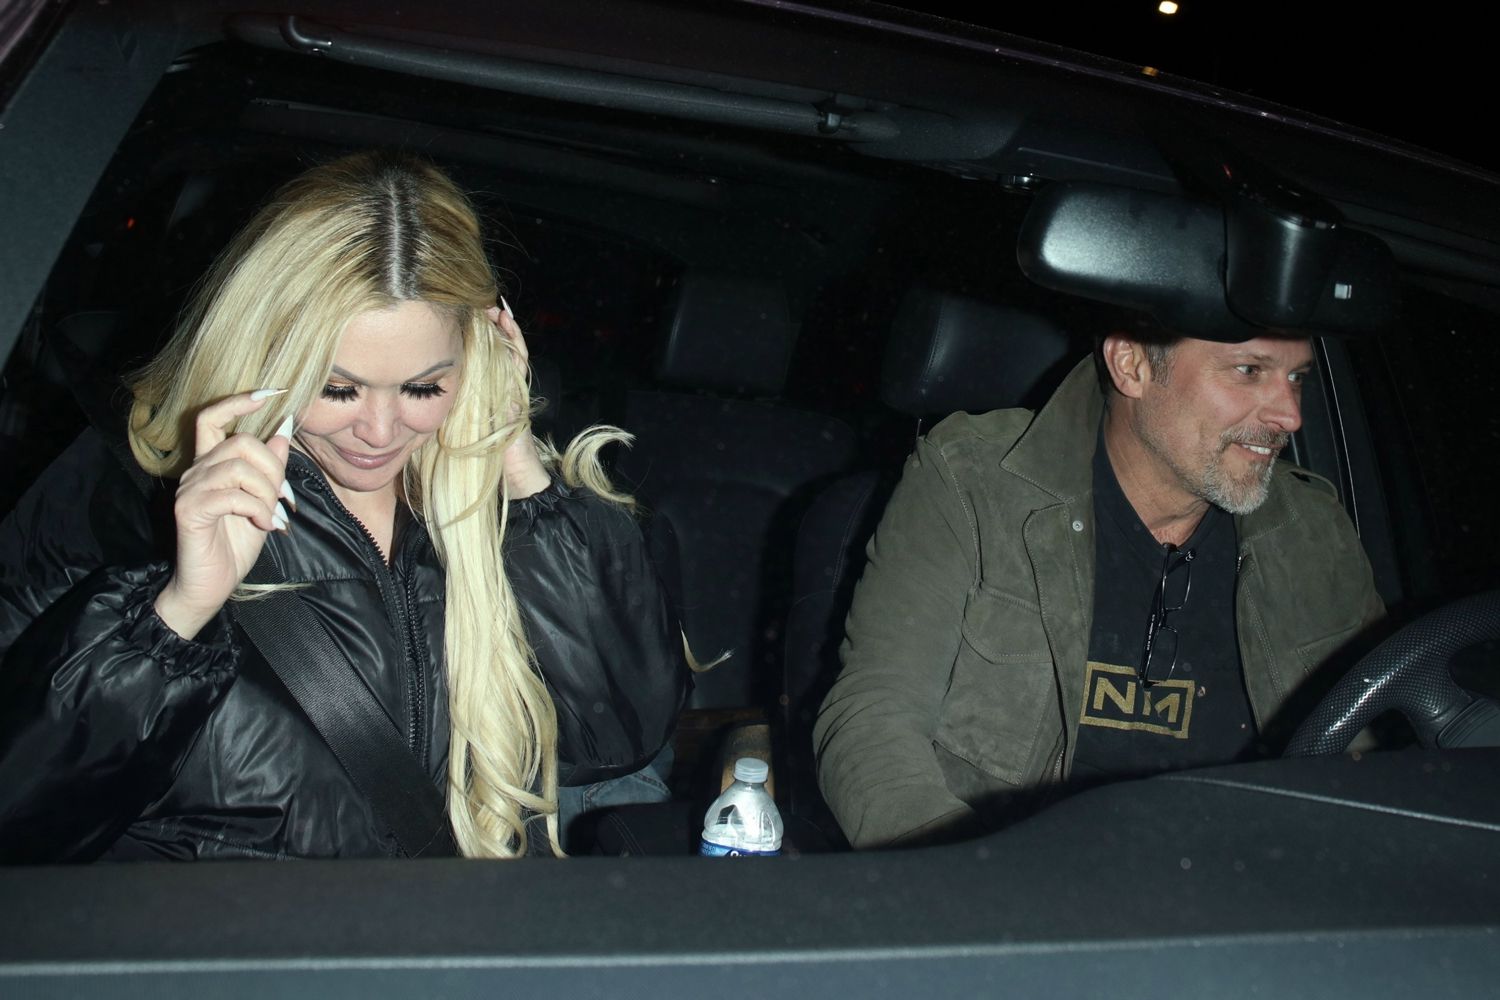 Shanna Moakler and Greg Vaughan were seen leaving The Black Keys' album release party, radiating style in her evening attire.